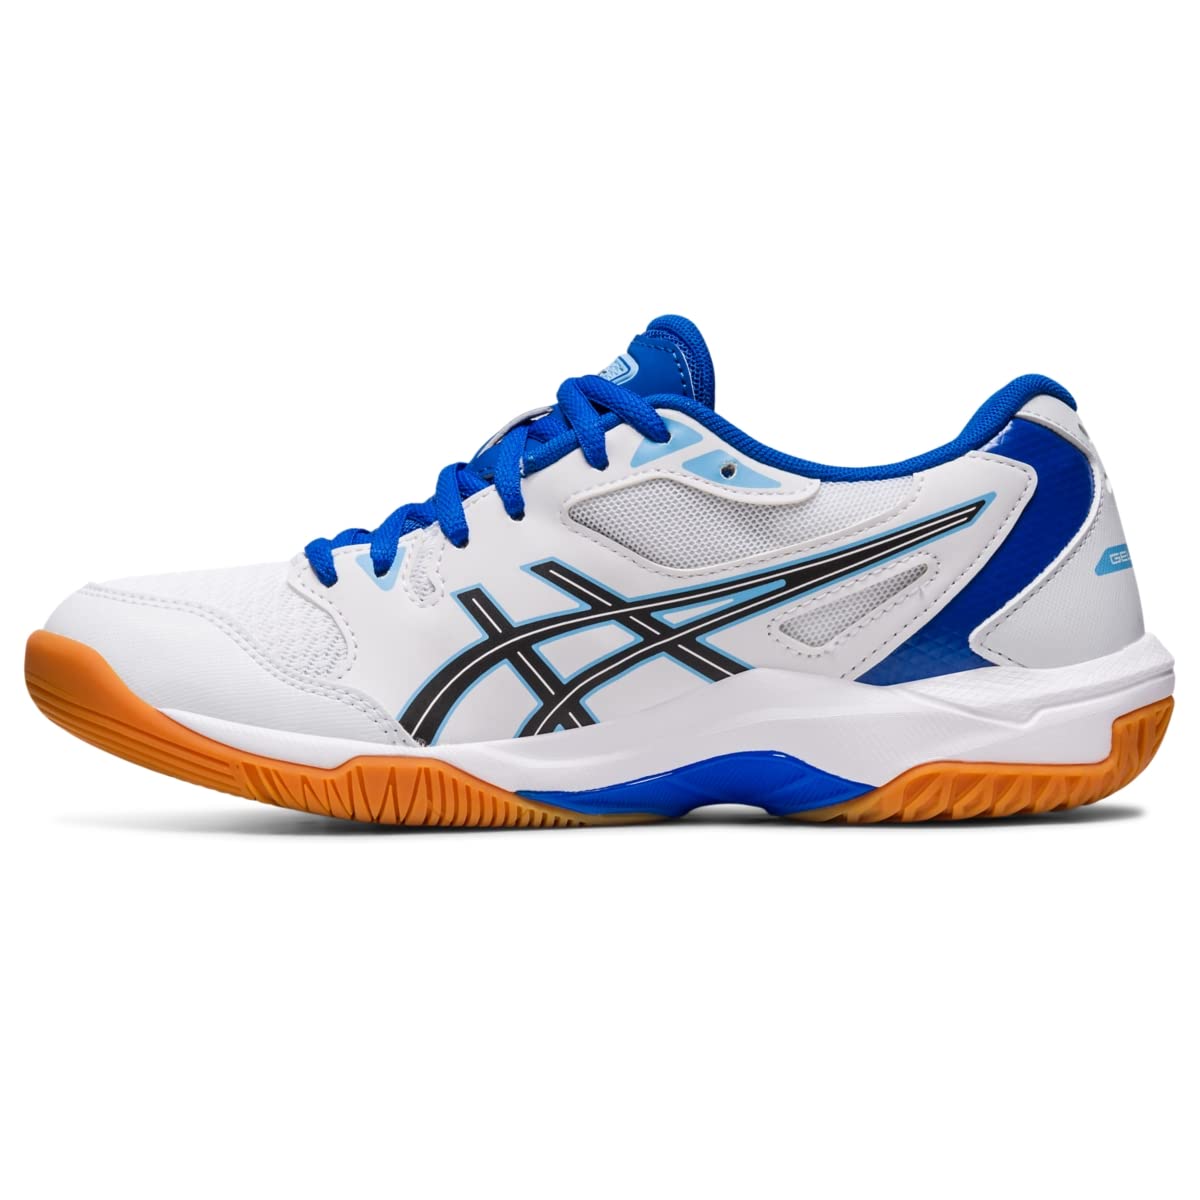 ASICS Women's Gel-Rocket 10 Volleyball Shoes, 10.5, White/Arctic Blue